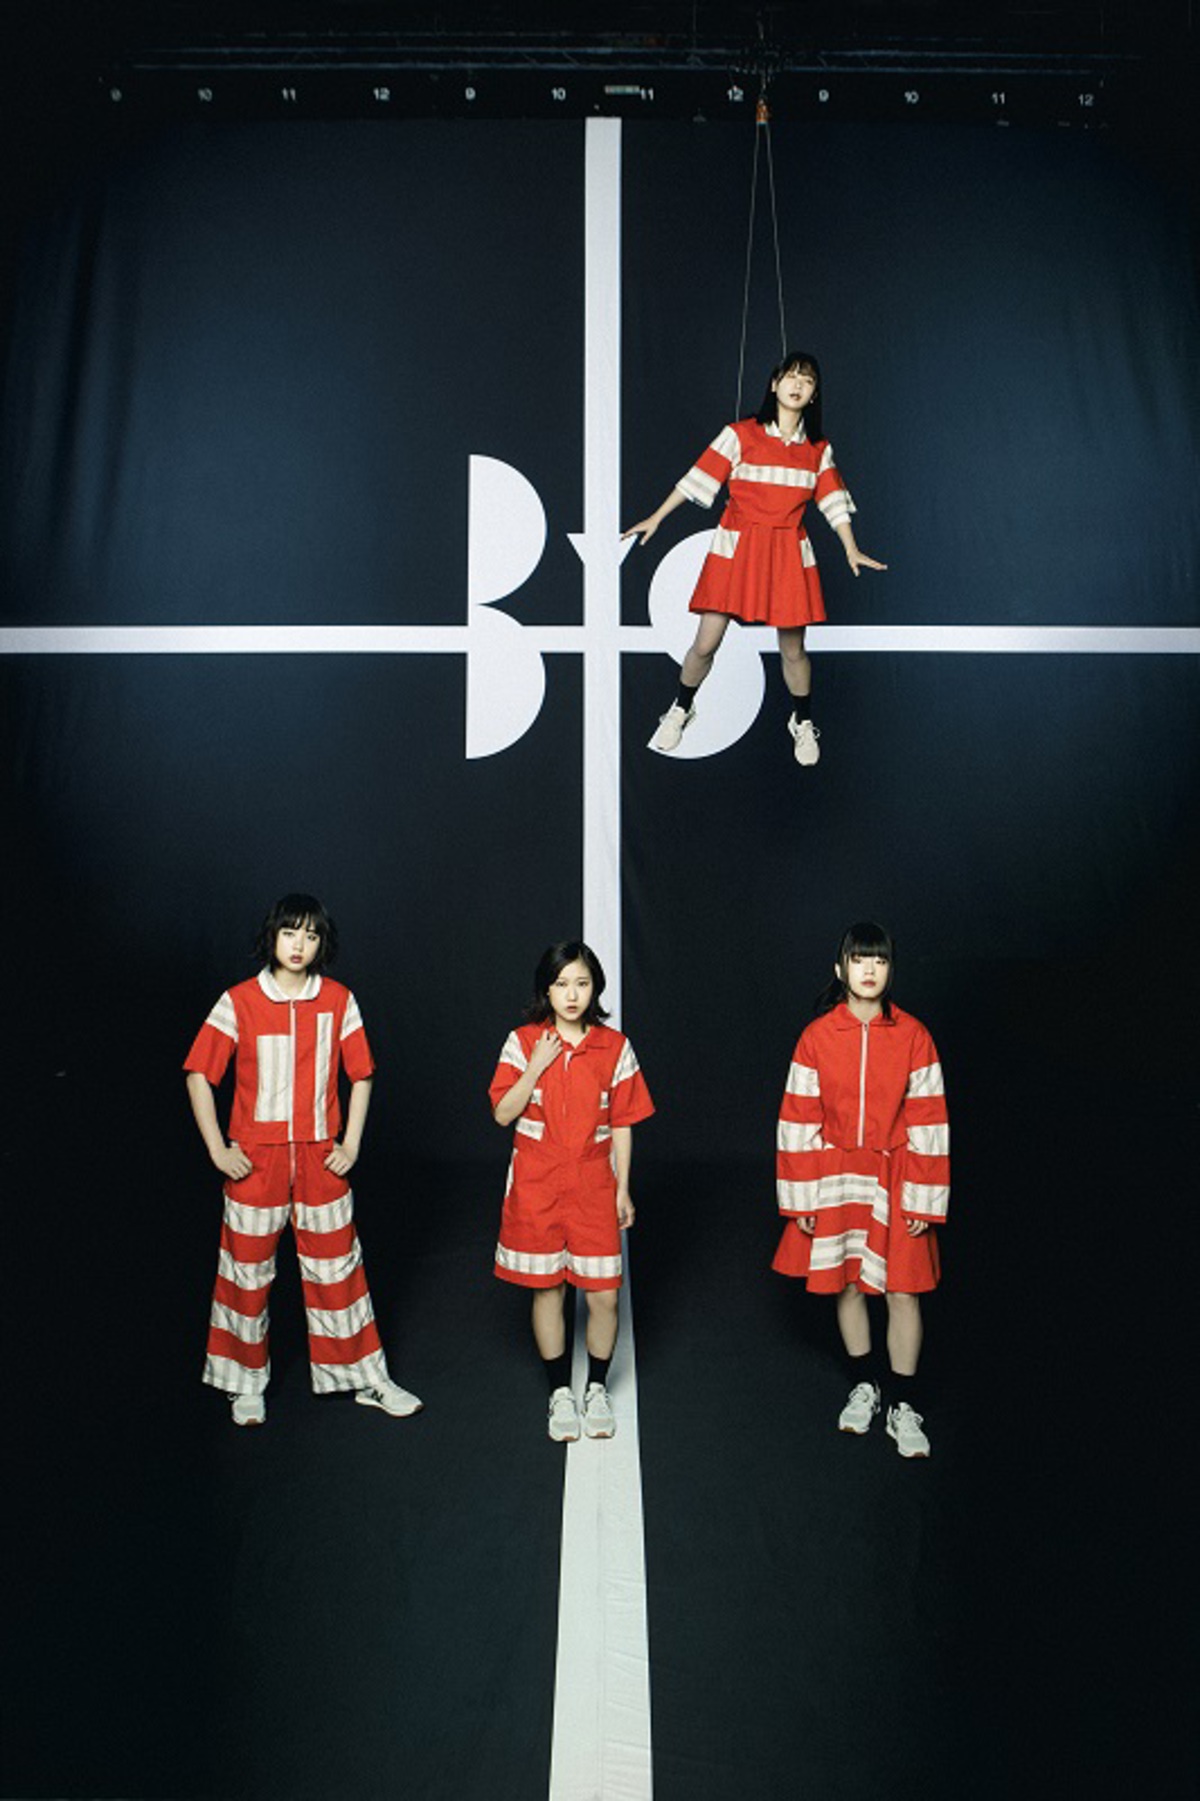 BiS、メジャー1st EP『ANTi CONFORMiST SUPERSTAR』より新曲「I WANT